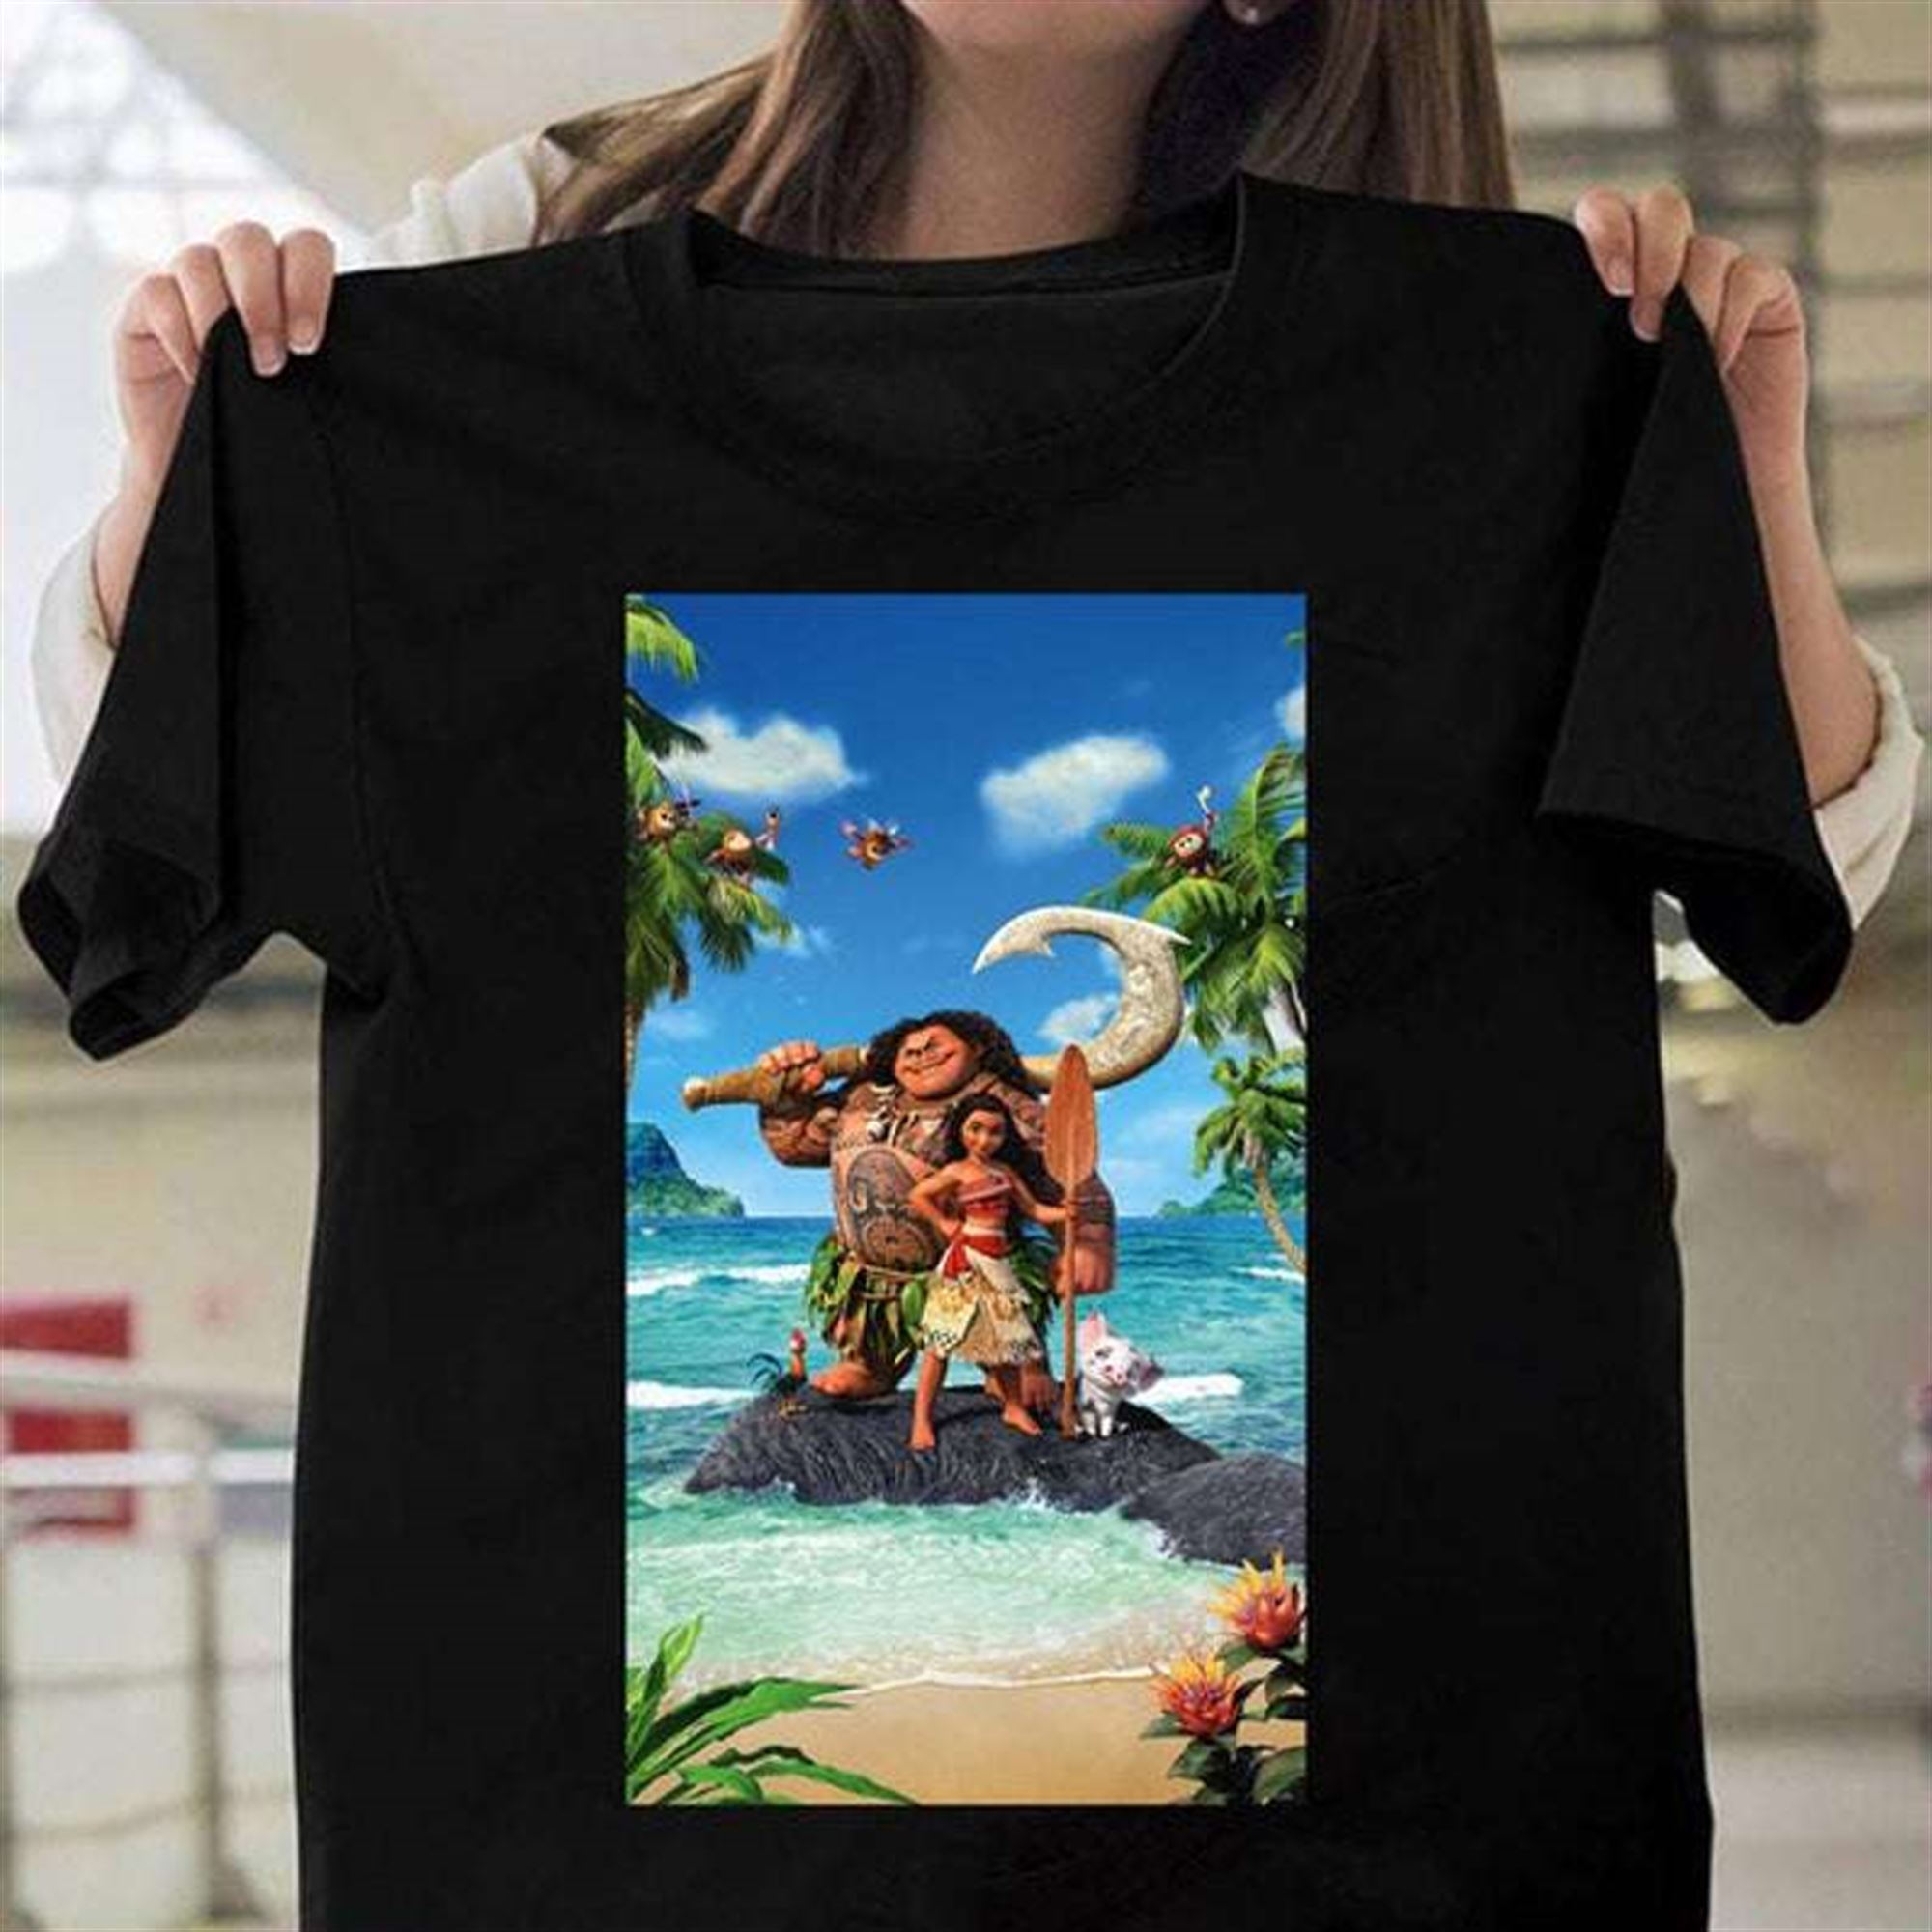 Disney Moana Find Your Own Way T Shirt Plus Size Up To 5x